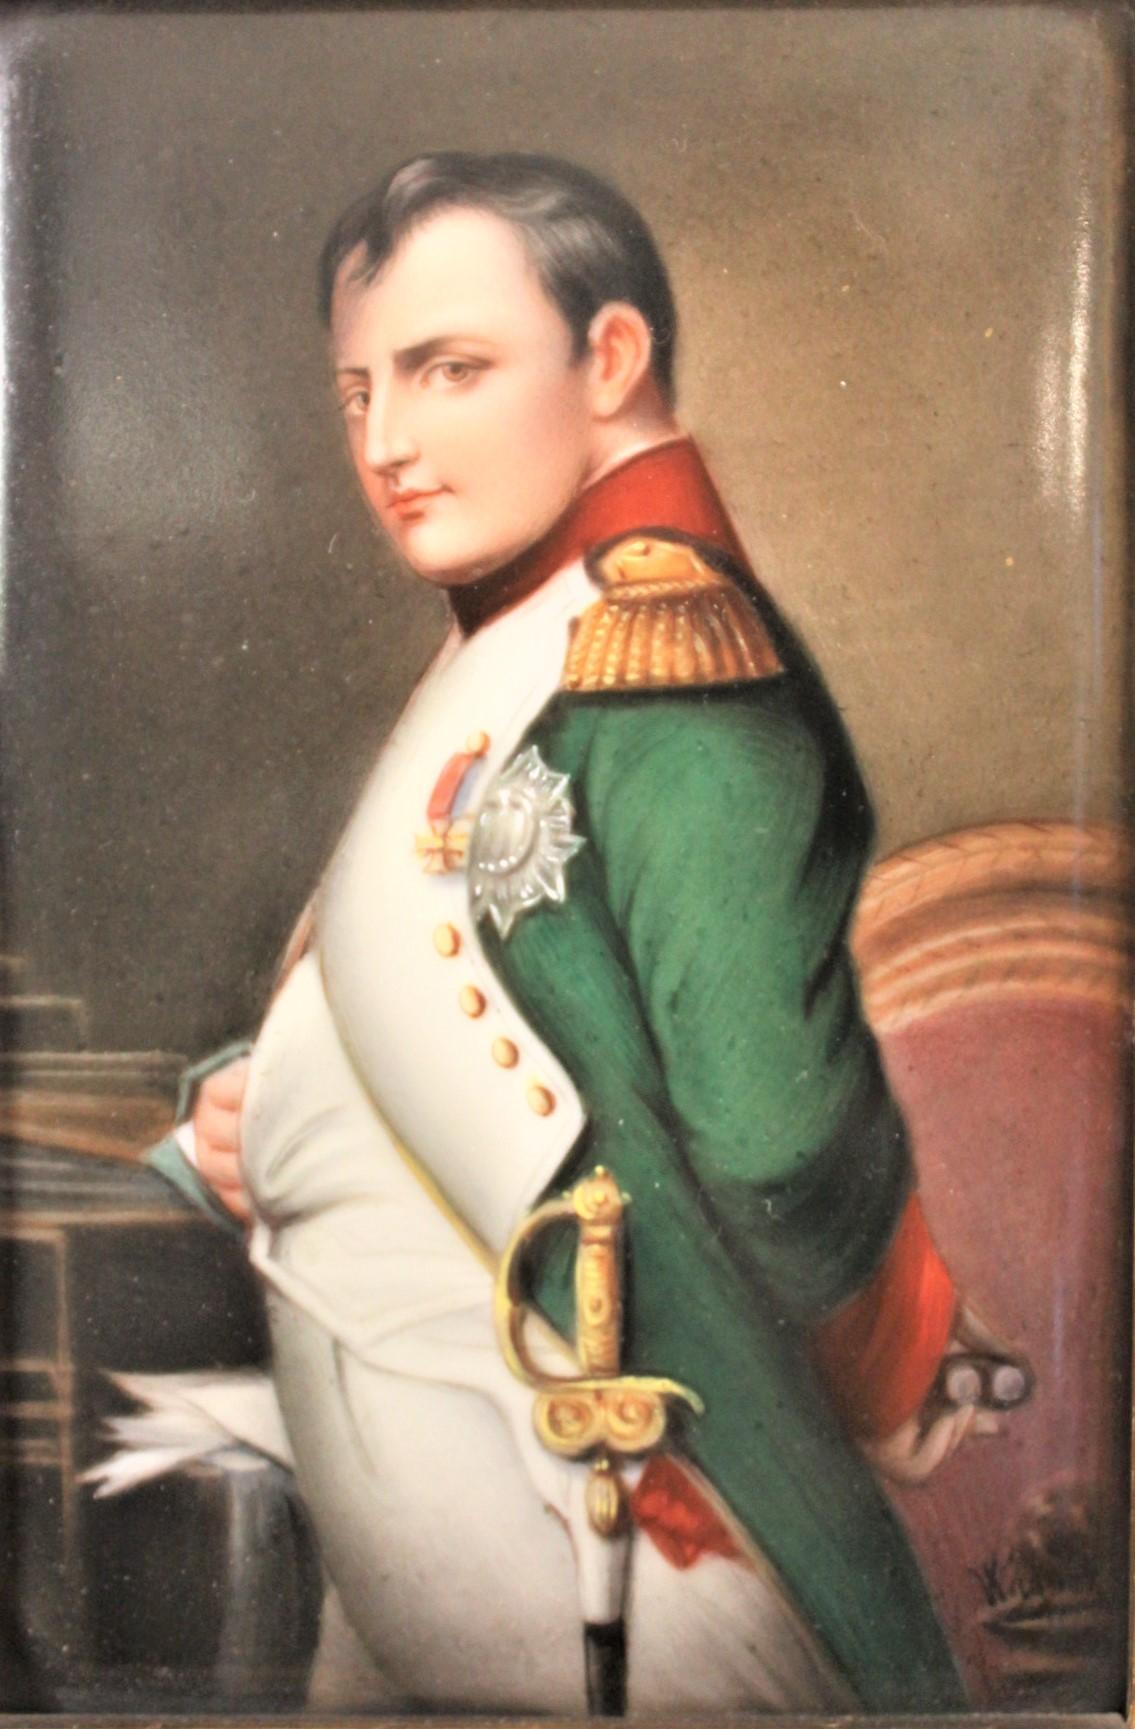 why did napoleon have his hand in his shirt